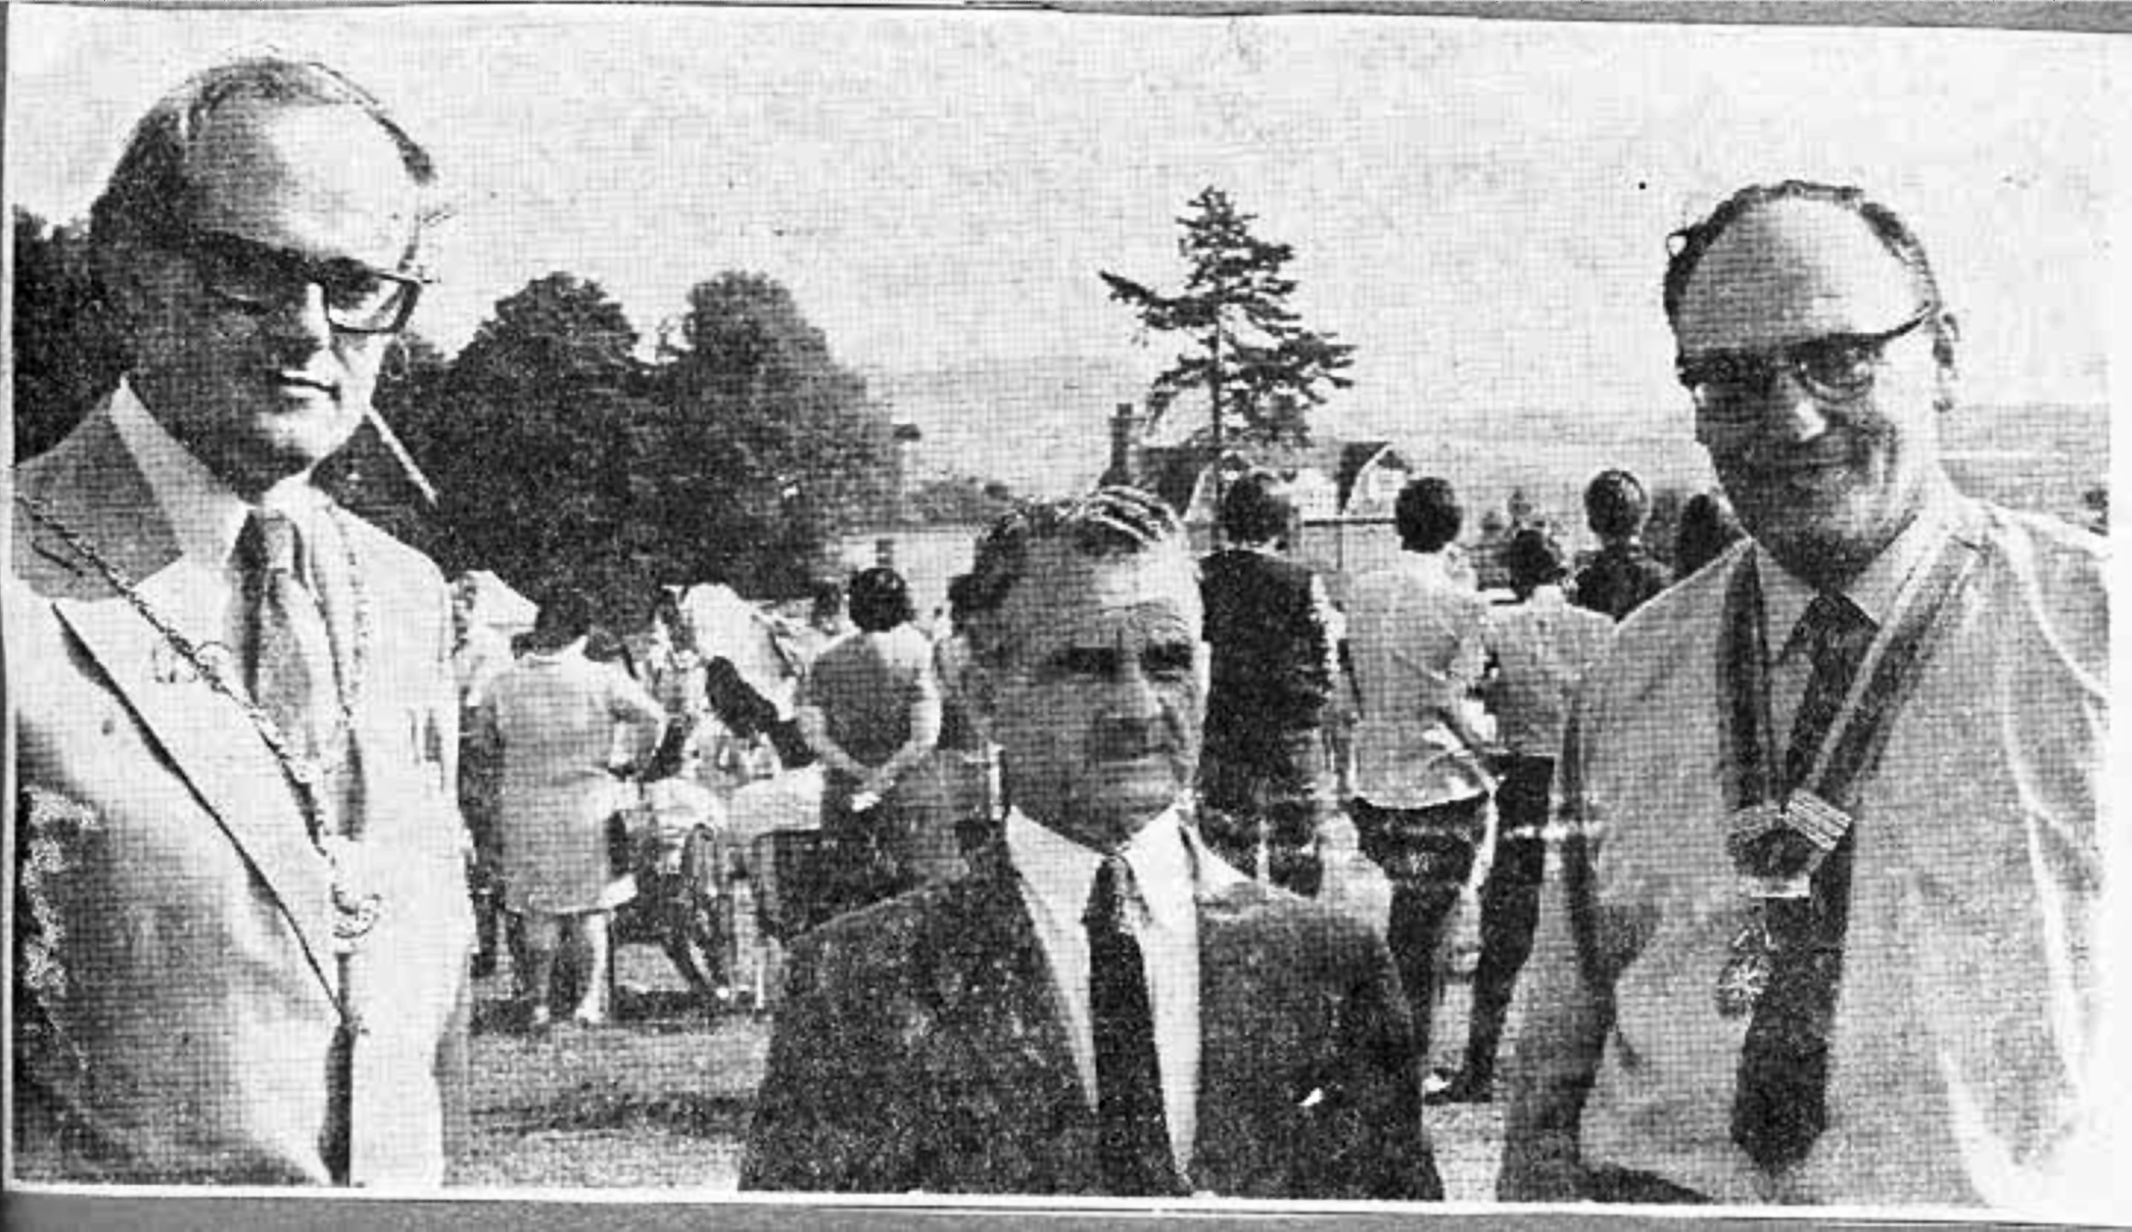 Sir Gordon Richards with the author, David Chandler (then Mayor) at the Marlborough Horse Show and Gymkhana on The Common in 1970. Photo credit David Chandler